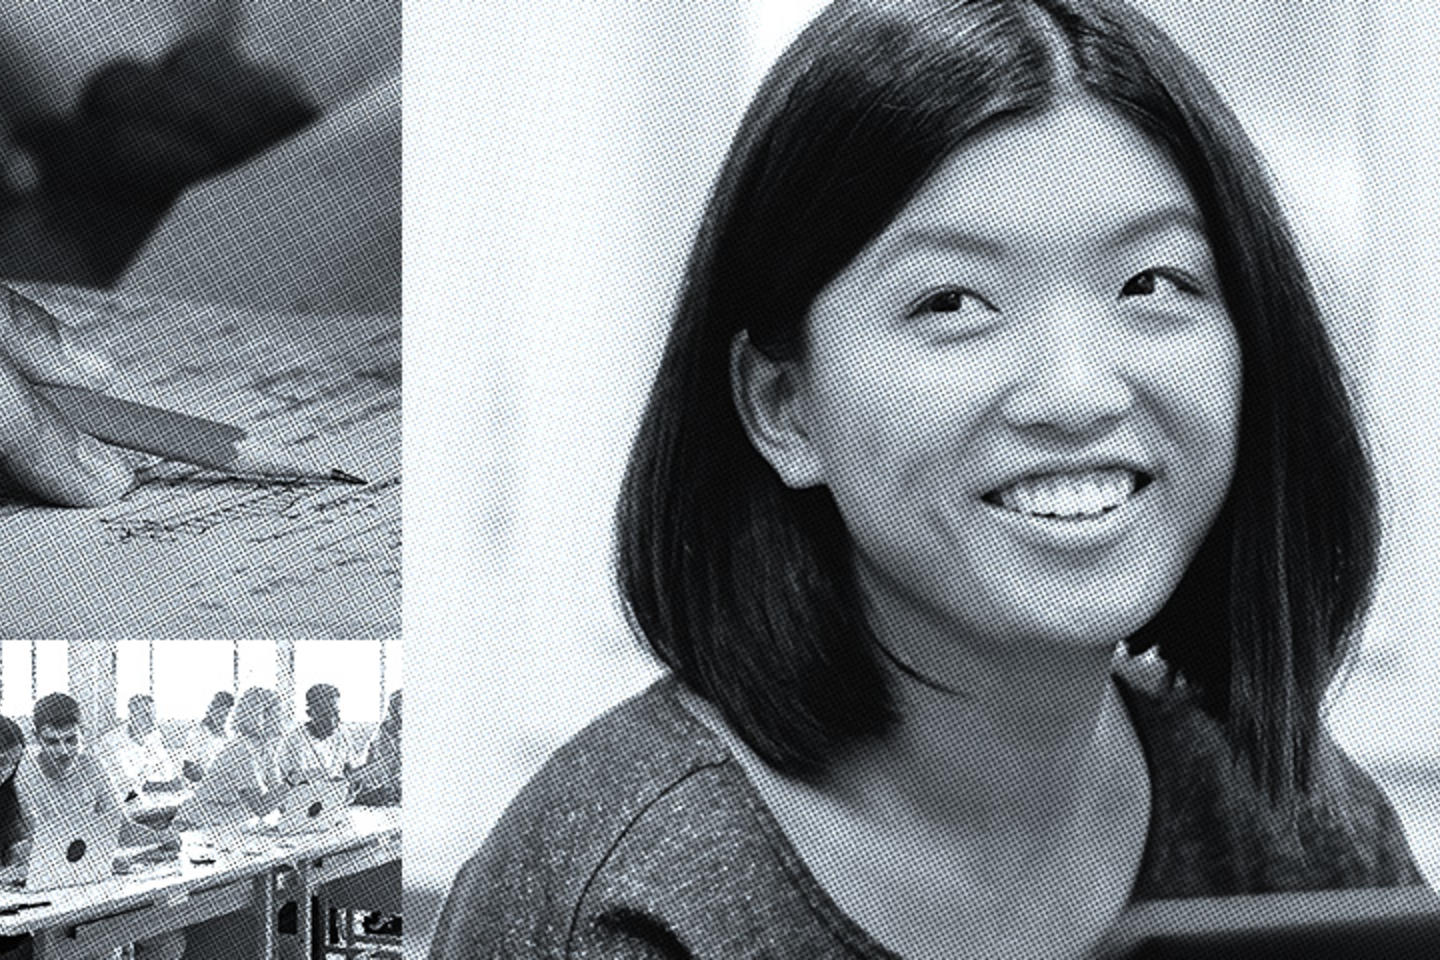 Three photos in black and white, the top left being a pencil against a piece of paper, while bottom left shows two people sharing a laptop in a classroom, and the right shows a young woman's face.